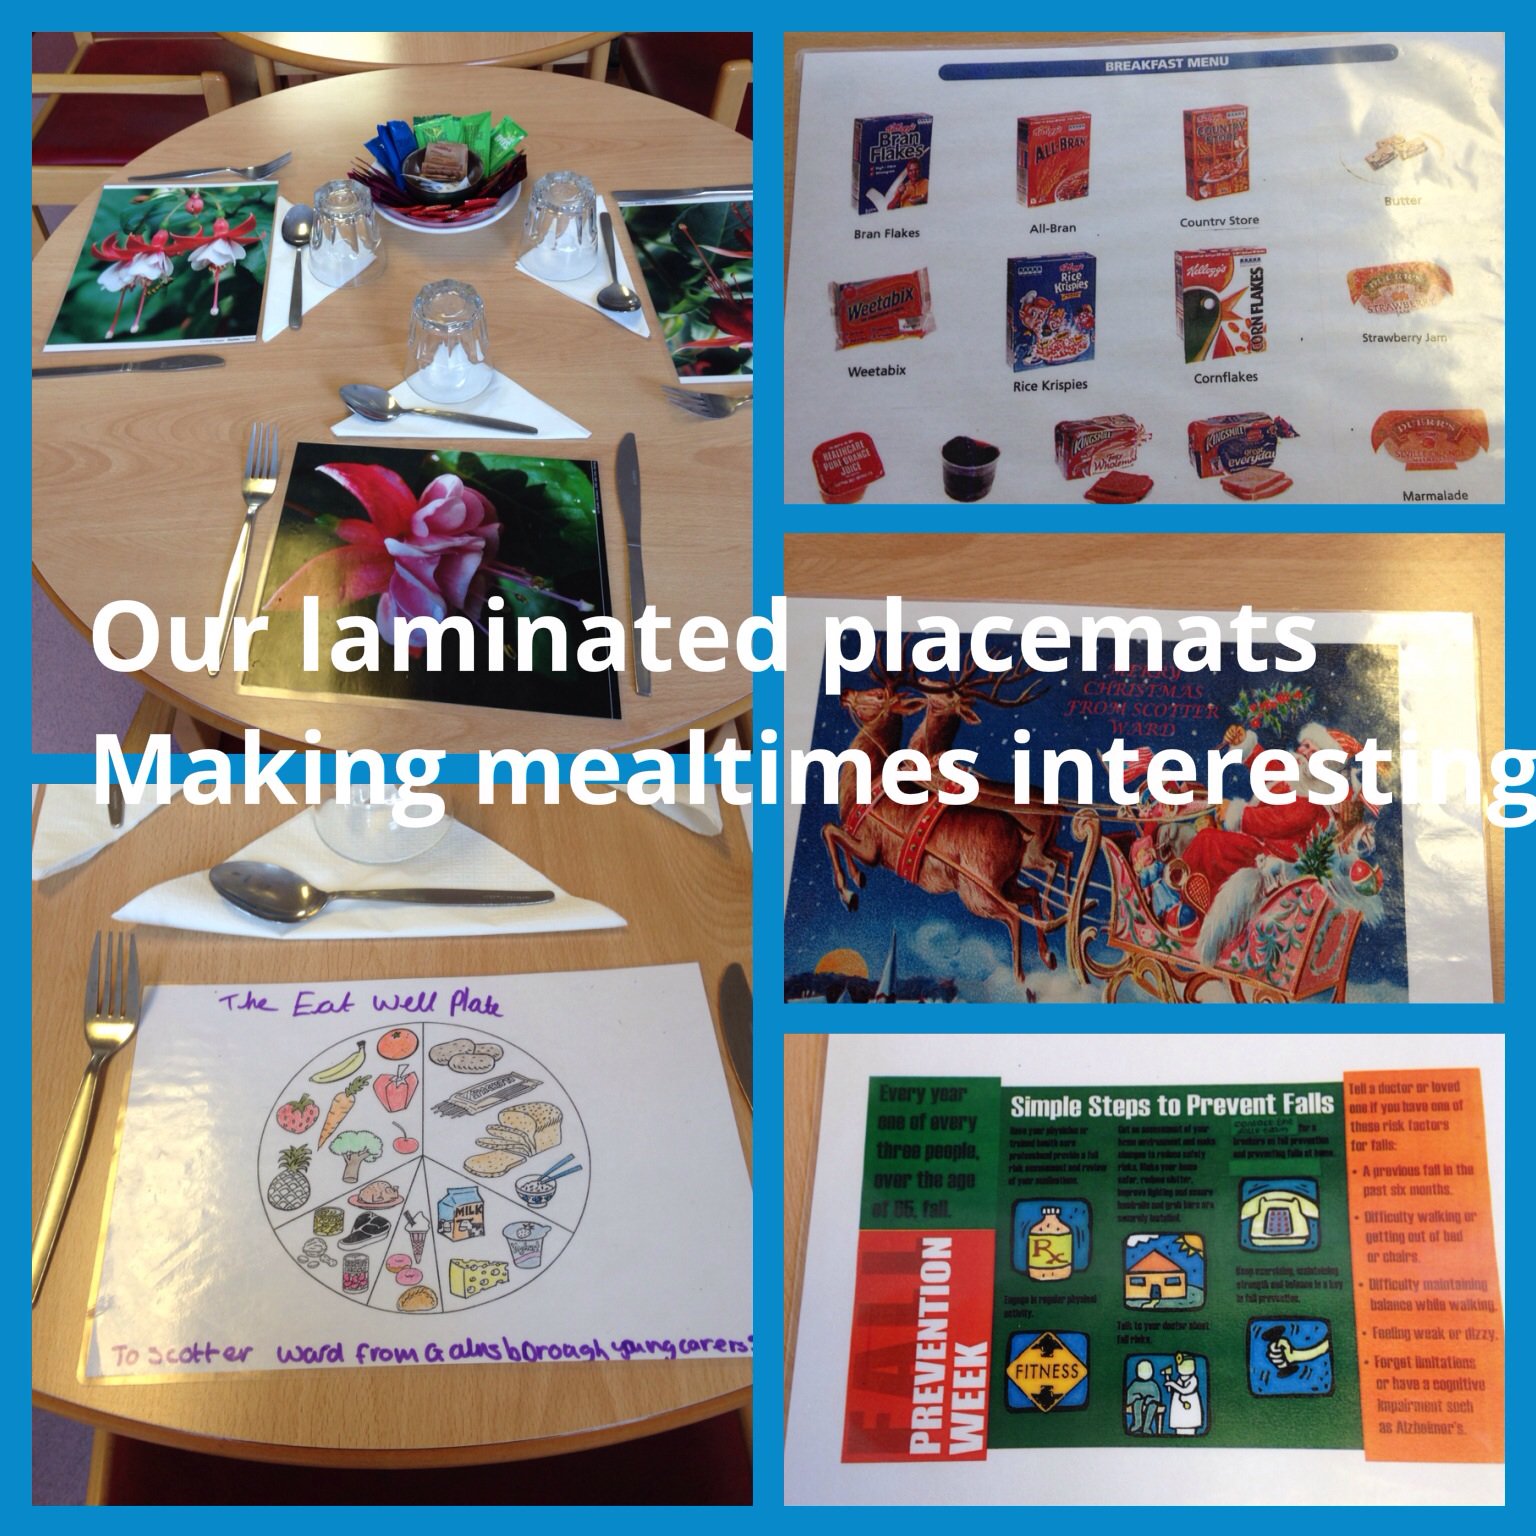 An innovative way to share health promotion messages with patients on placemats at mealtimes featured image